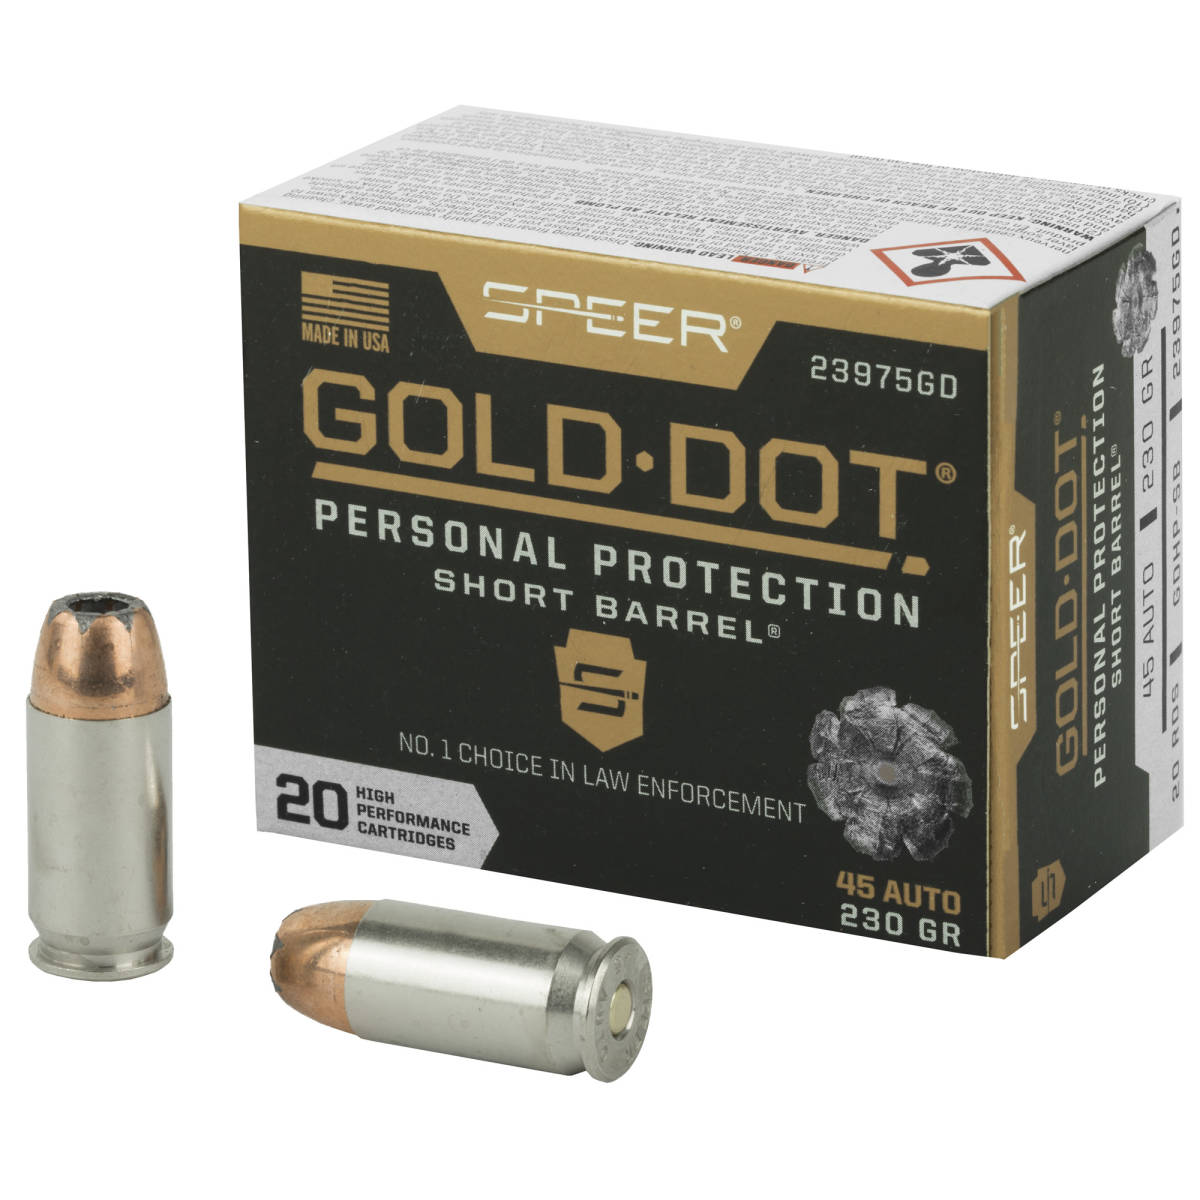 Speer 23975GD Gold Dot Personal Protection Short Barrel 45 ACP 230 gr...-img-0